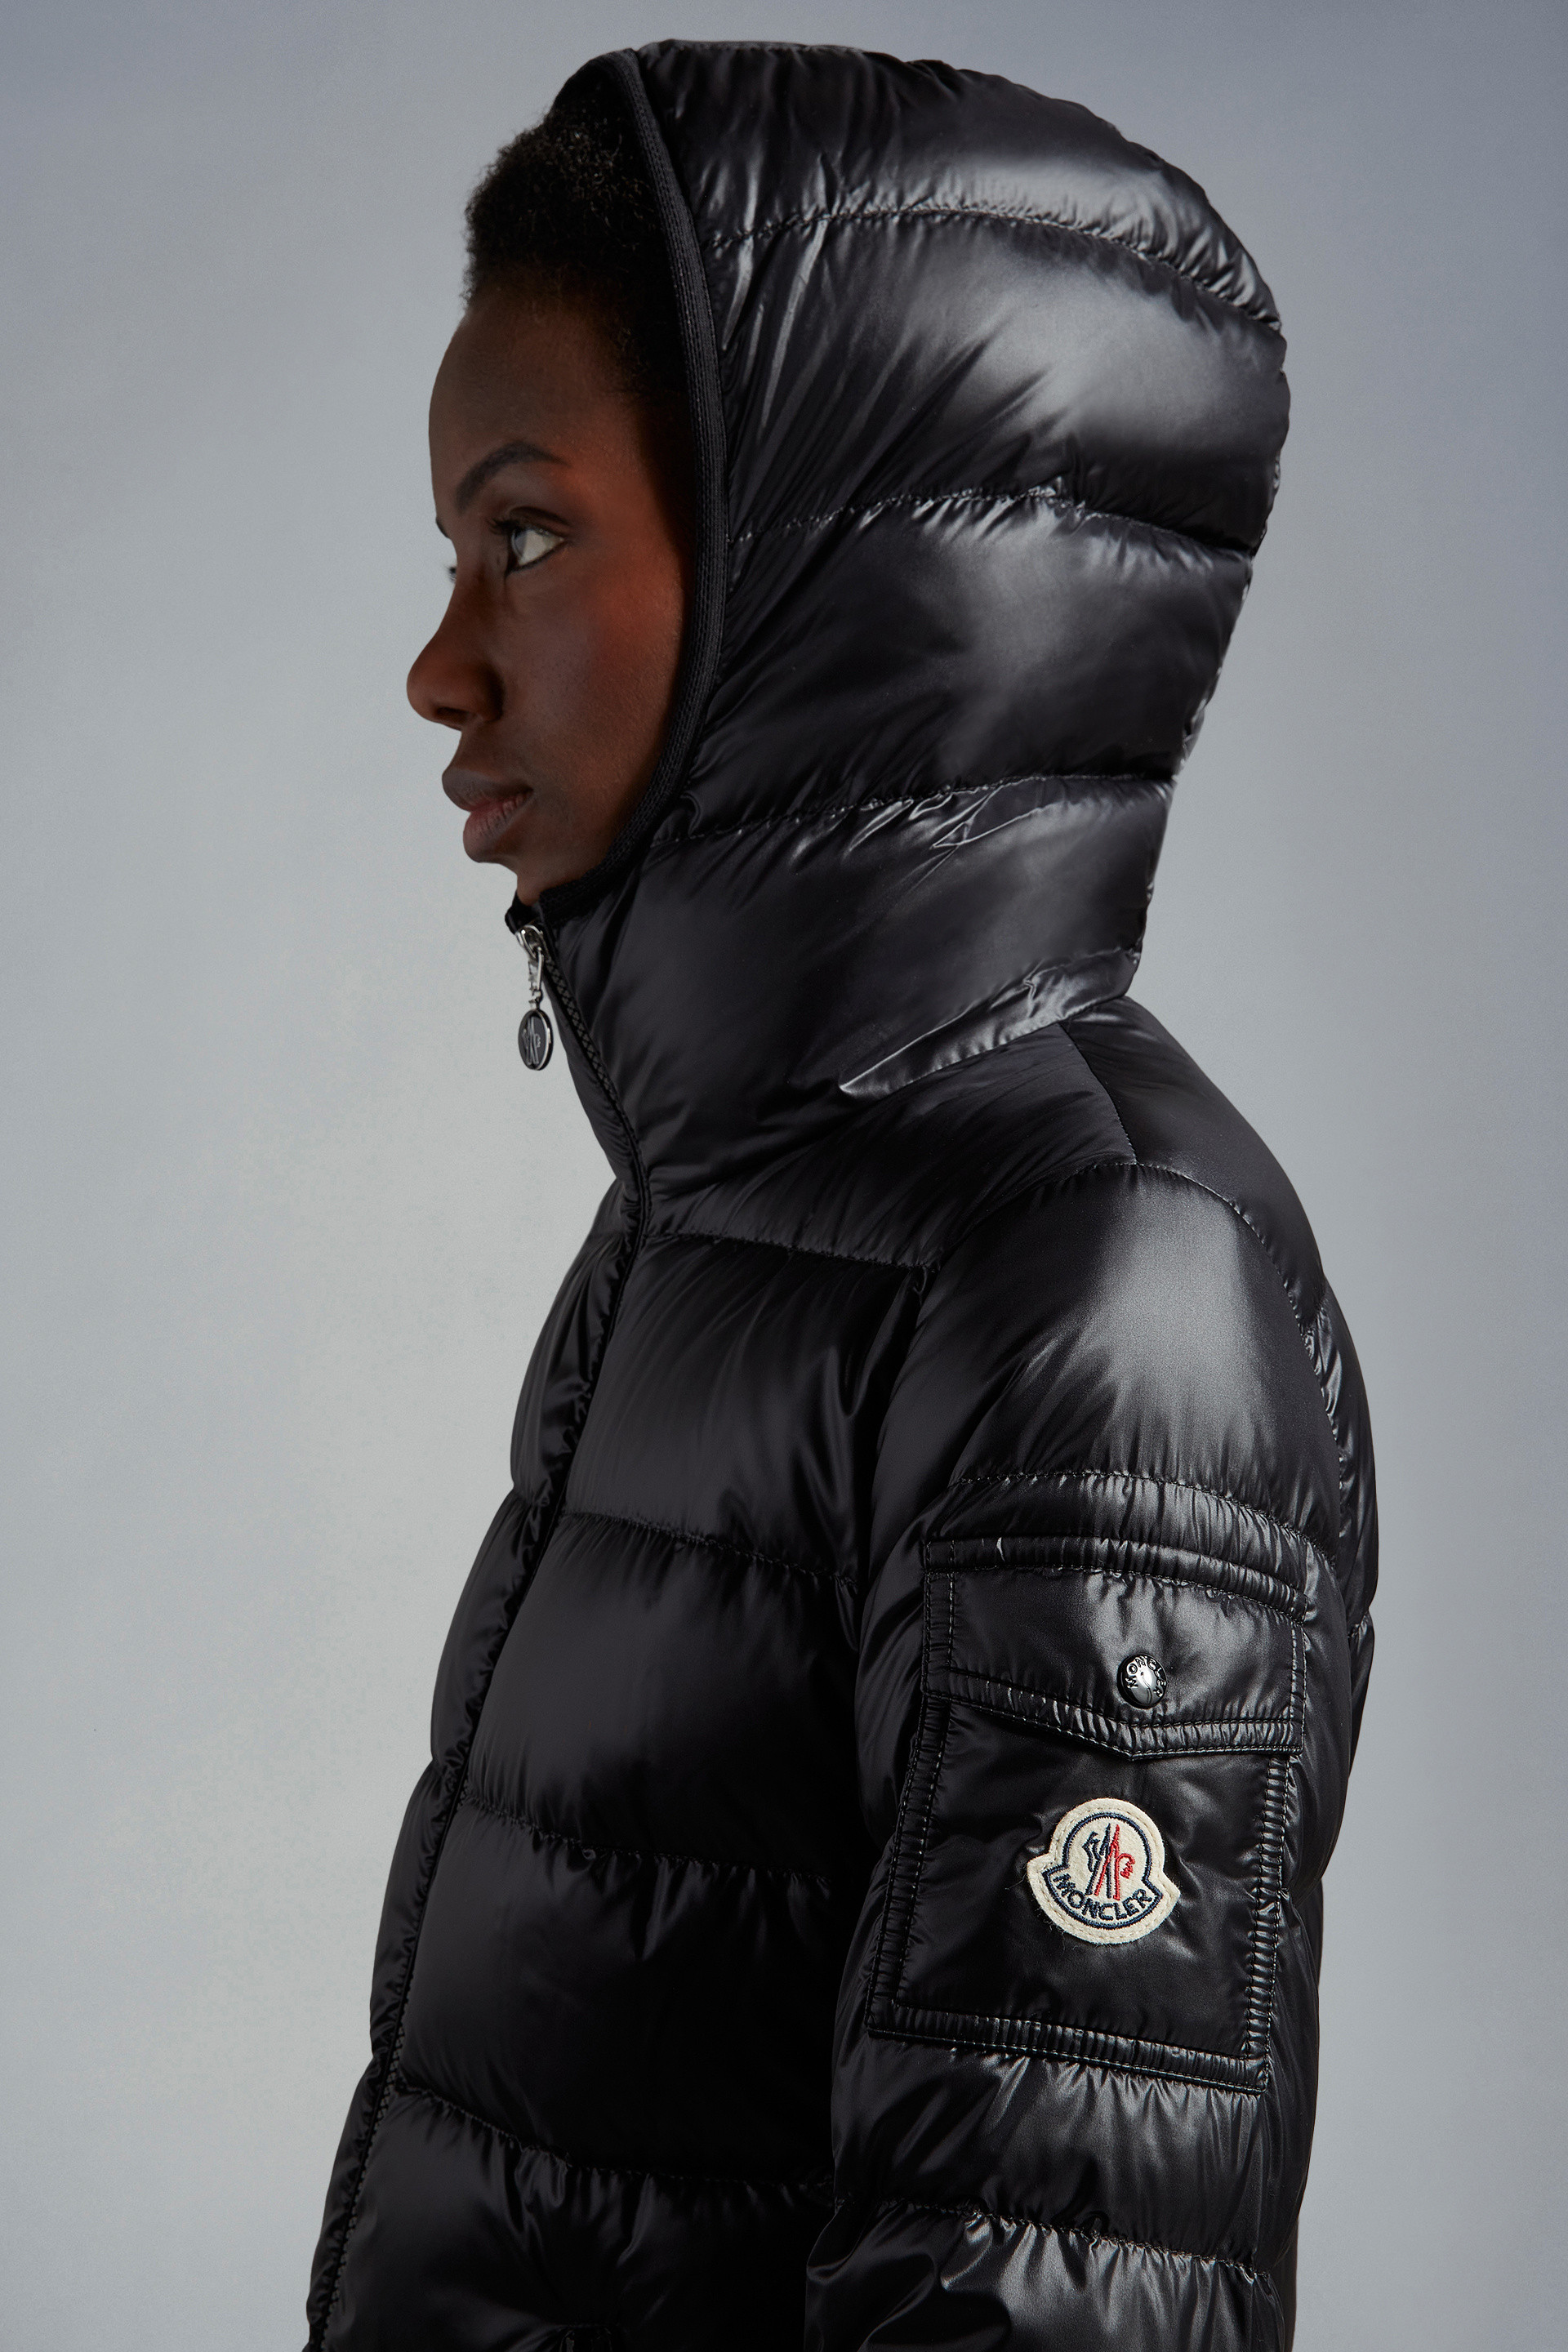 Women's Clothing - New Down Jackets, Dresses & Shoes | Moncler